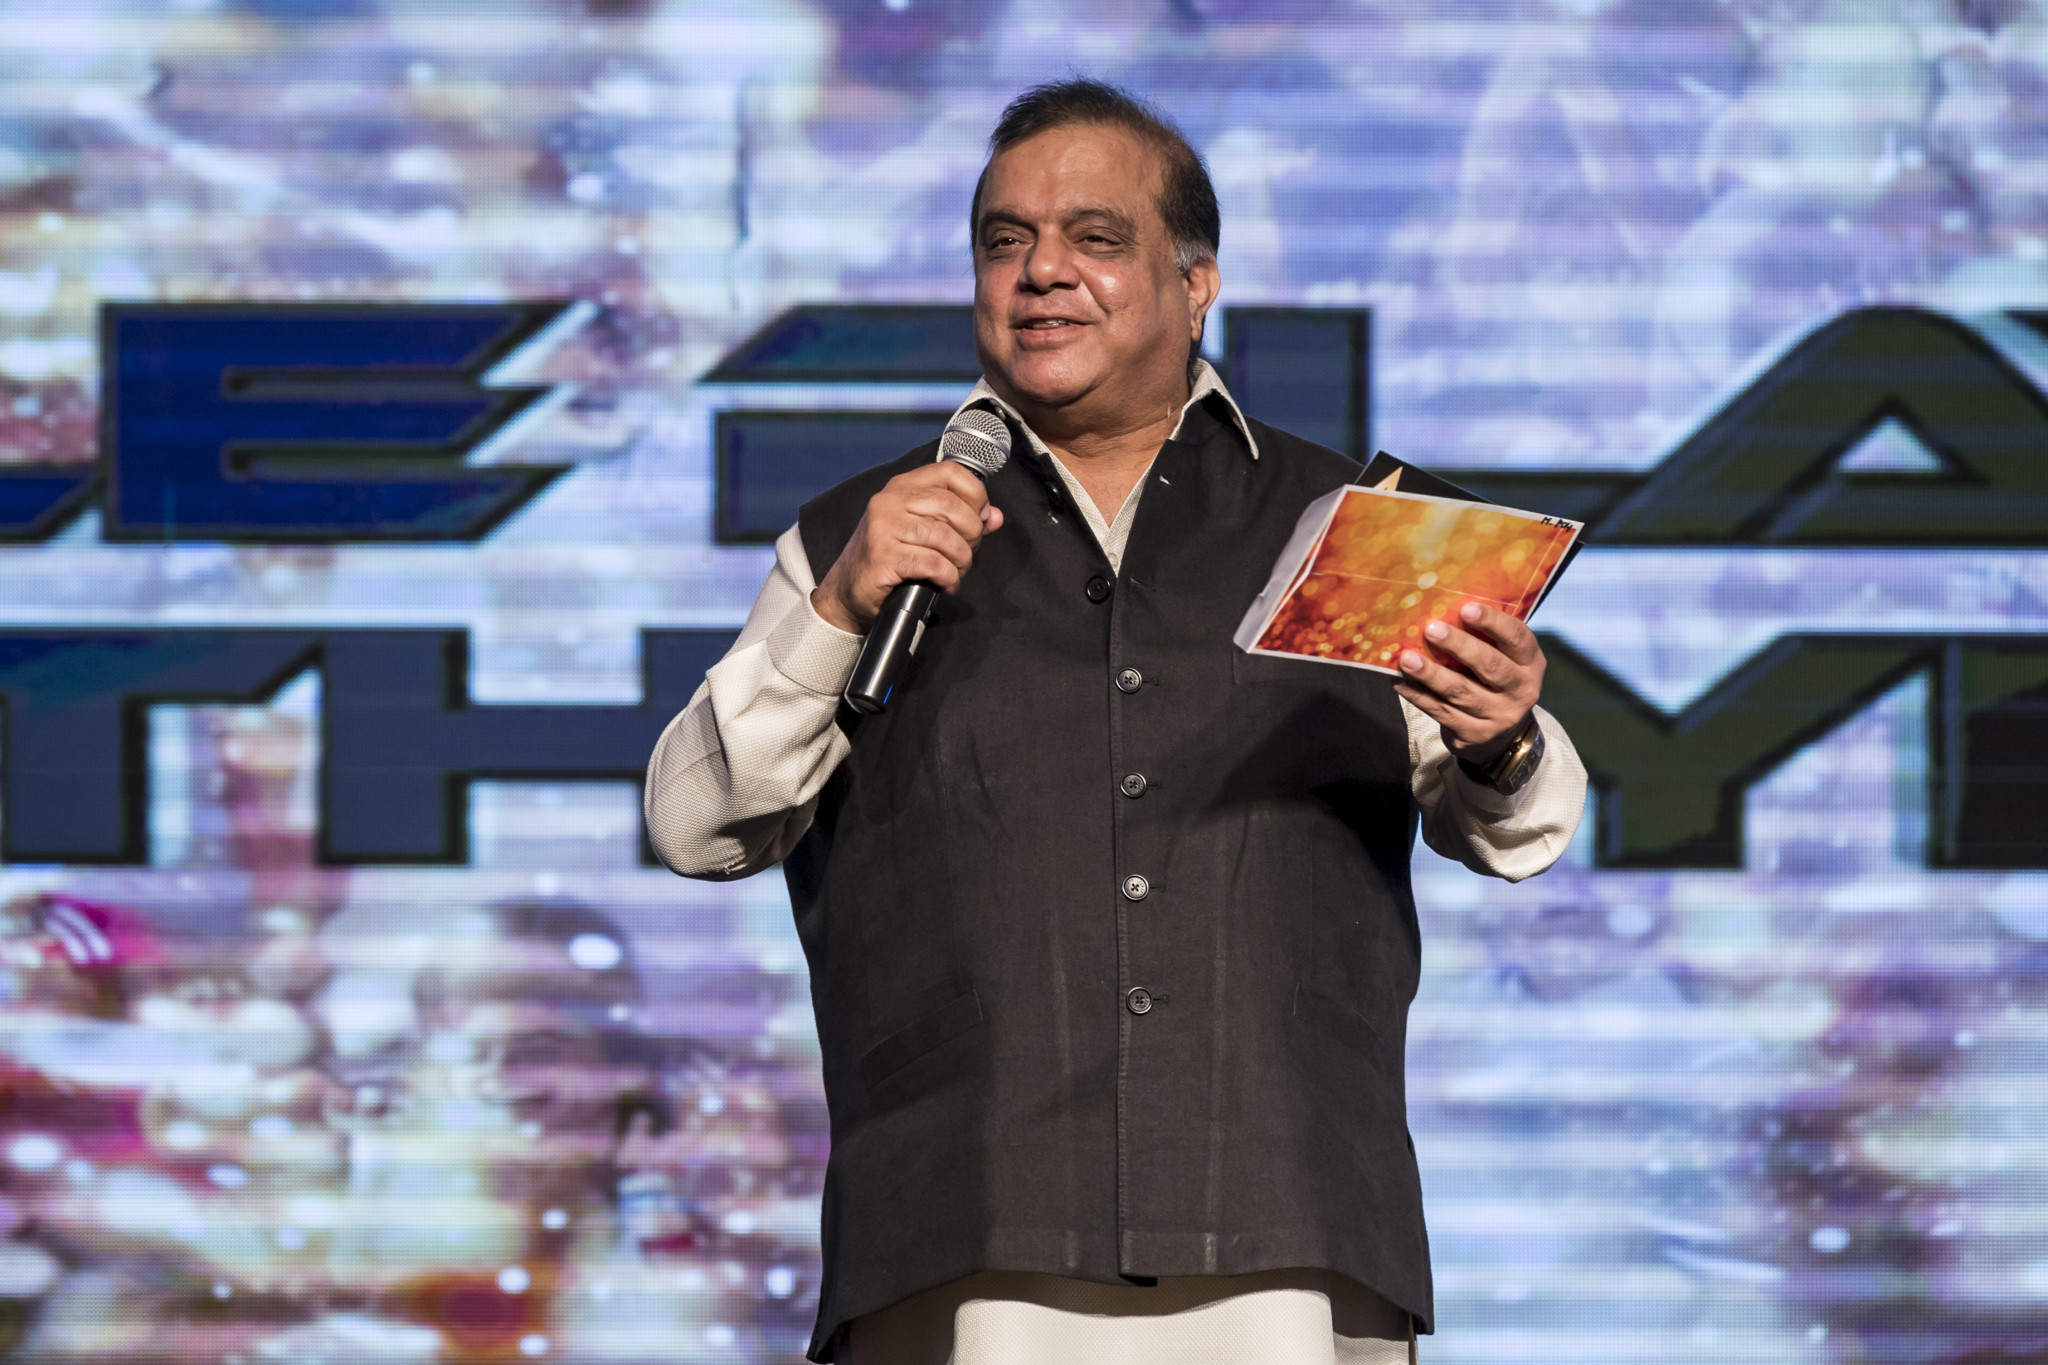 Narinder Batra is poised to be elected President of the Indian Olympic Association ©Getty Images